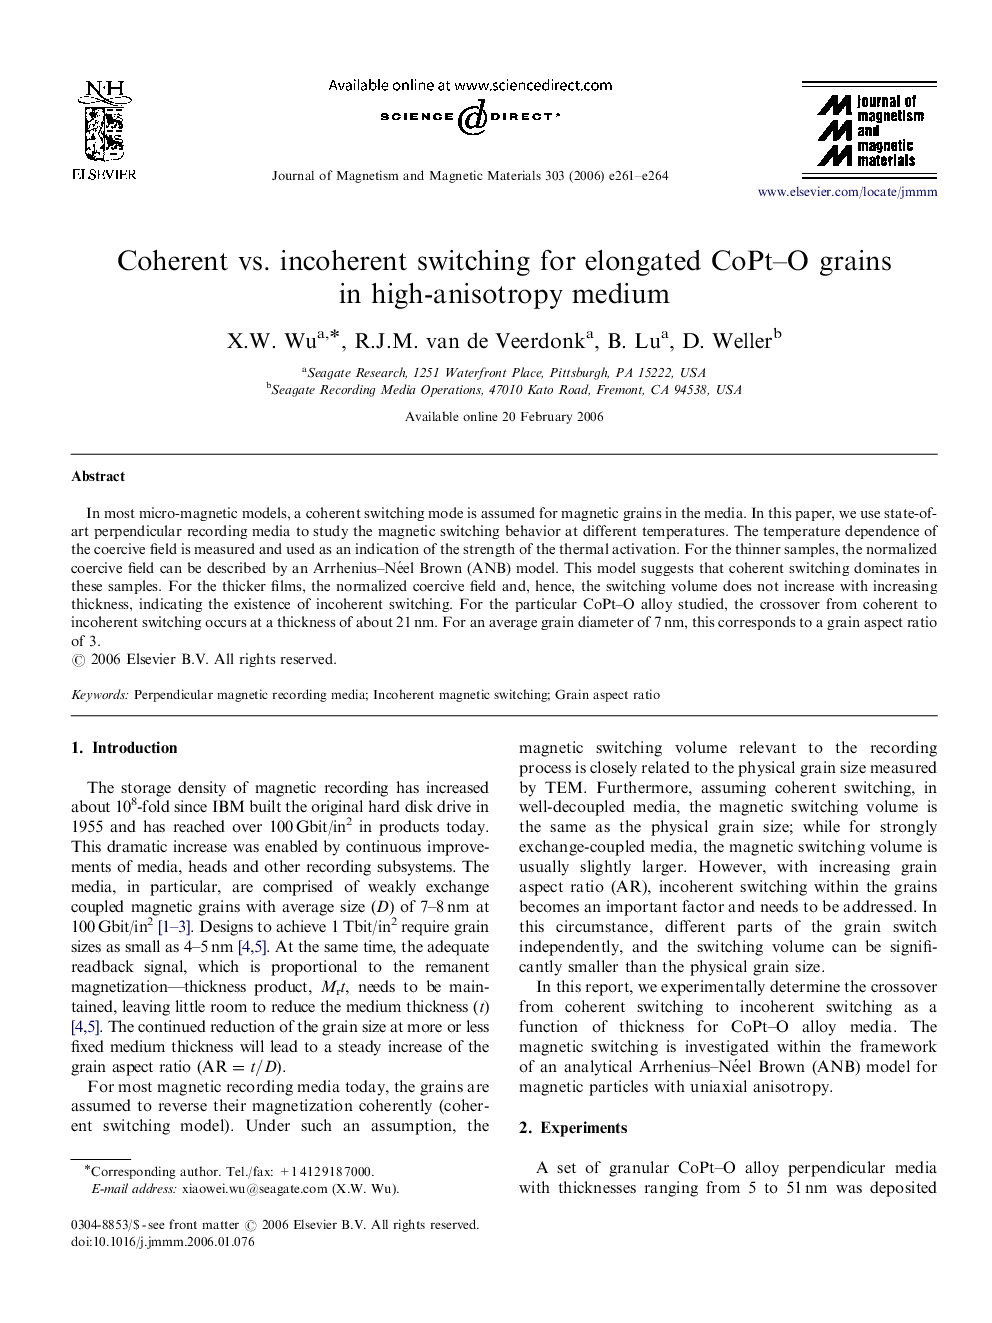 Coherent vs. incoherent switching for elongated CoPt-O grains in high-anisotropy medium